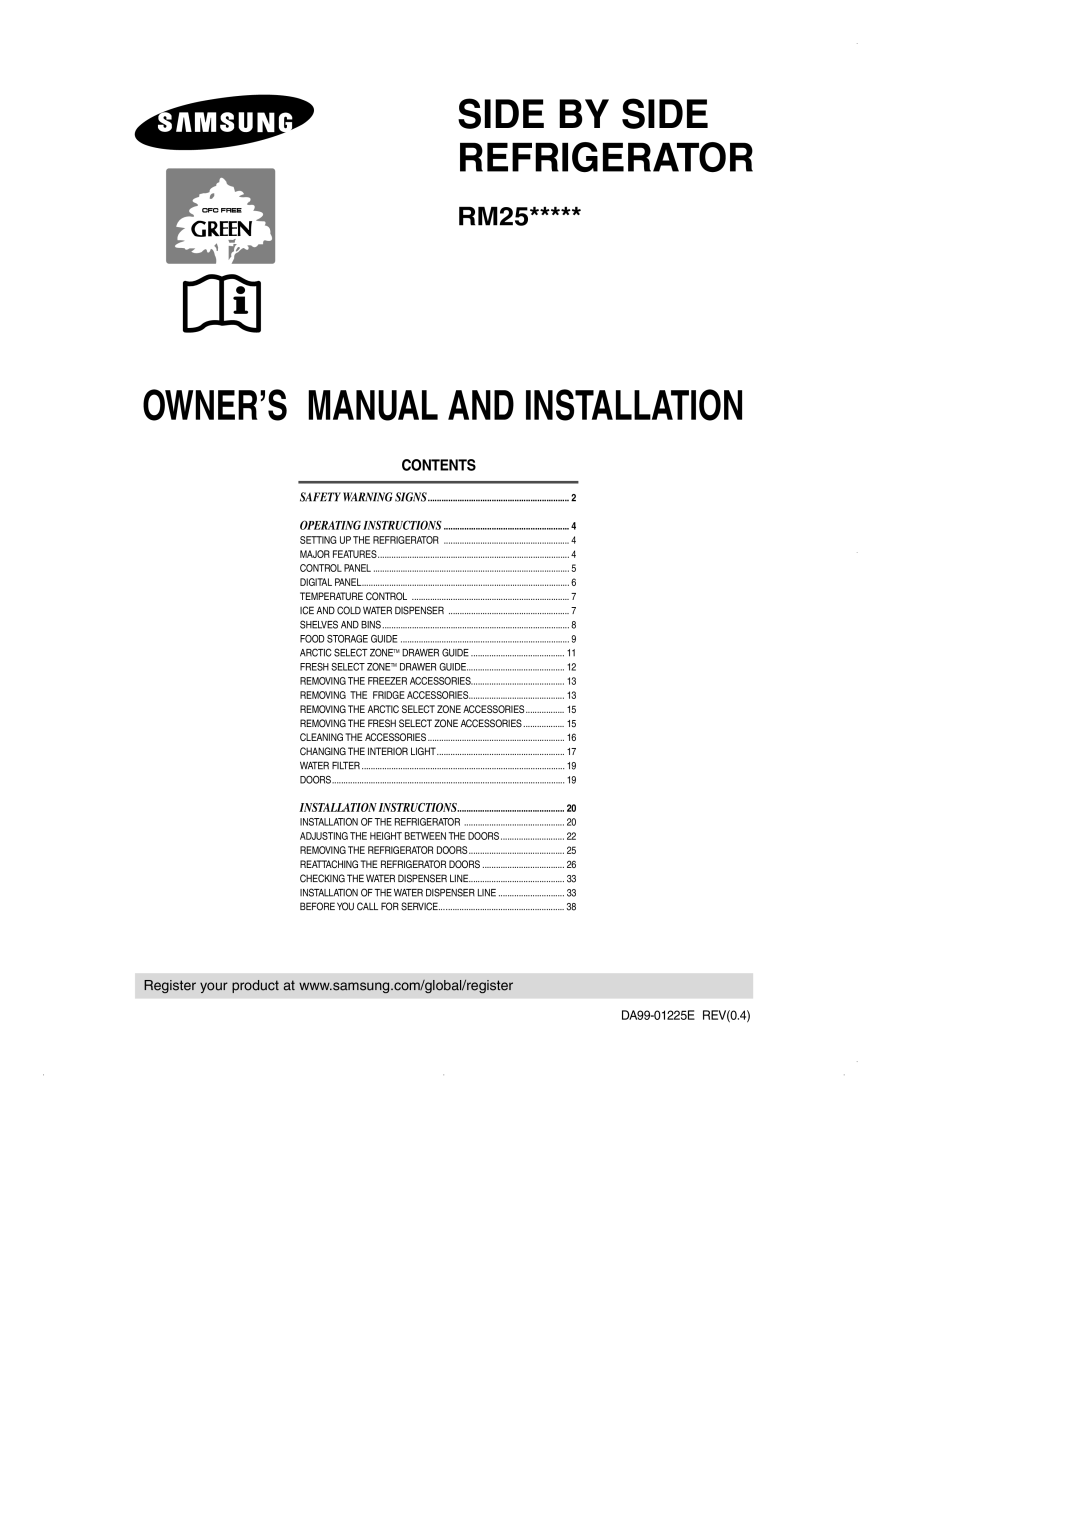 GE RM25 owner manual Contents, Side By Side Refrigerator, Safety Warning Signs, Operating Instructions 